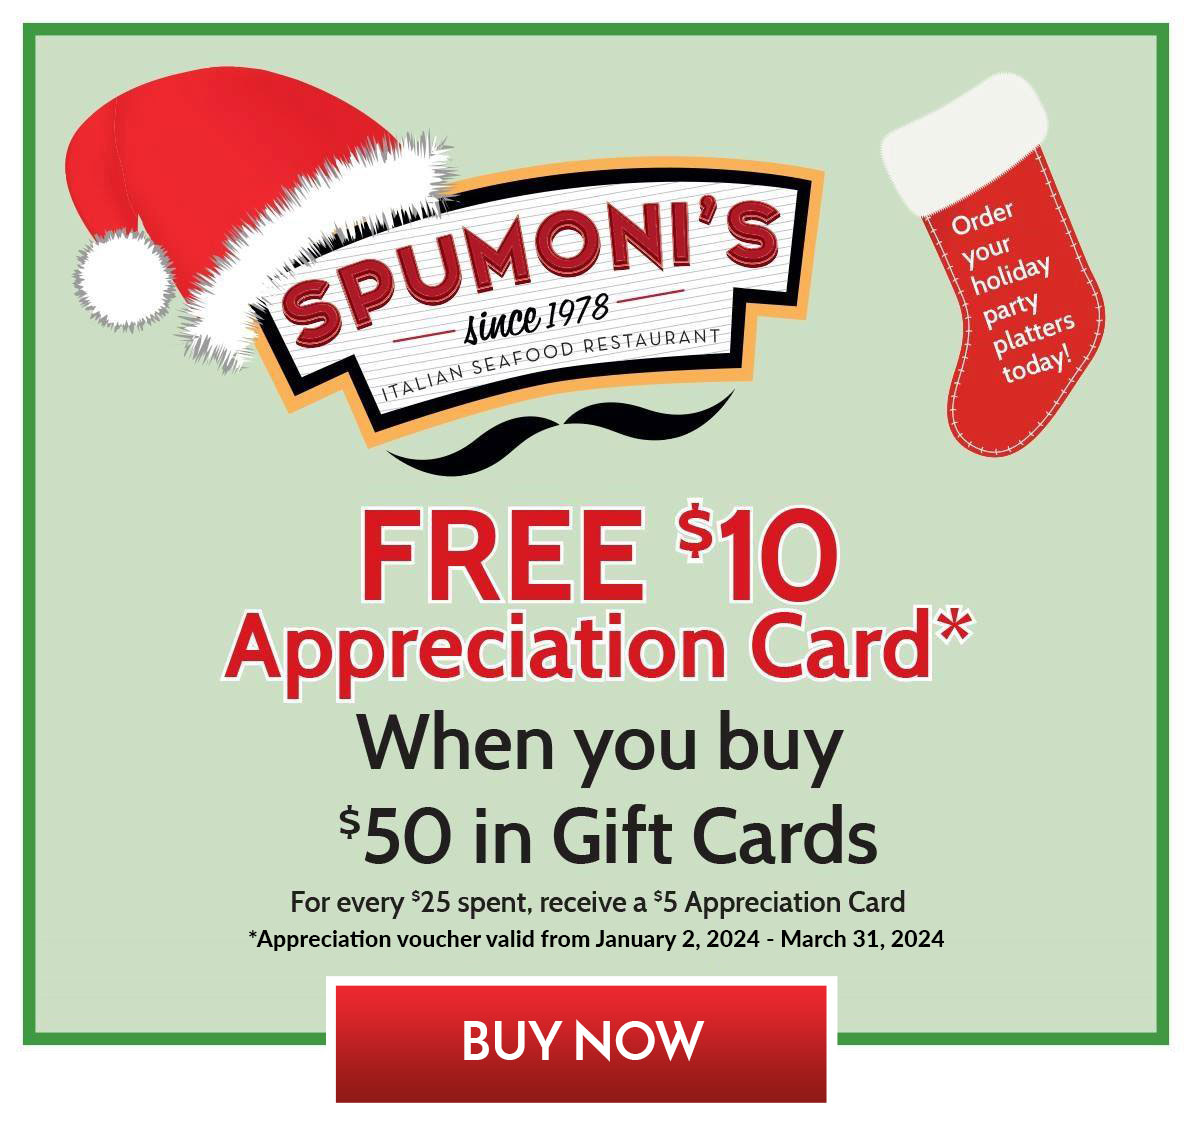 Click to Buy | FREE $10 Appreciation Card when you buy $50 in Gift Cards